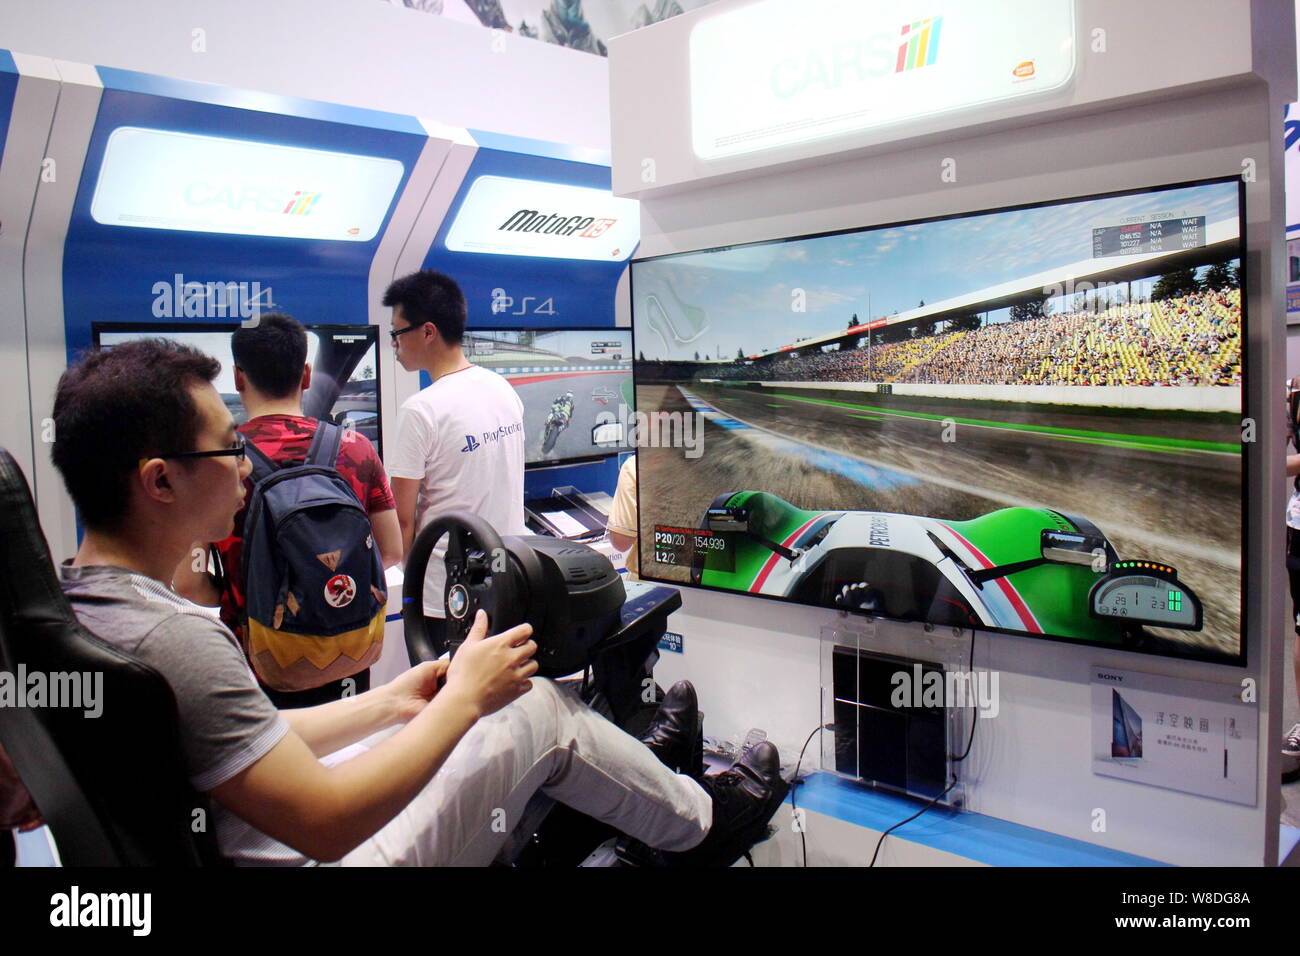 Visitors try out electronic racing games on Sony's PlayStation 4 or PS4 game  consoles during the 13th China Digital Entertainment Expo, also known as  Stock Photo - Alamy